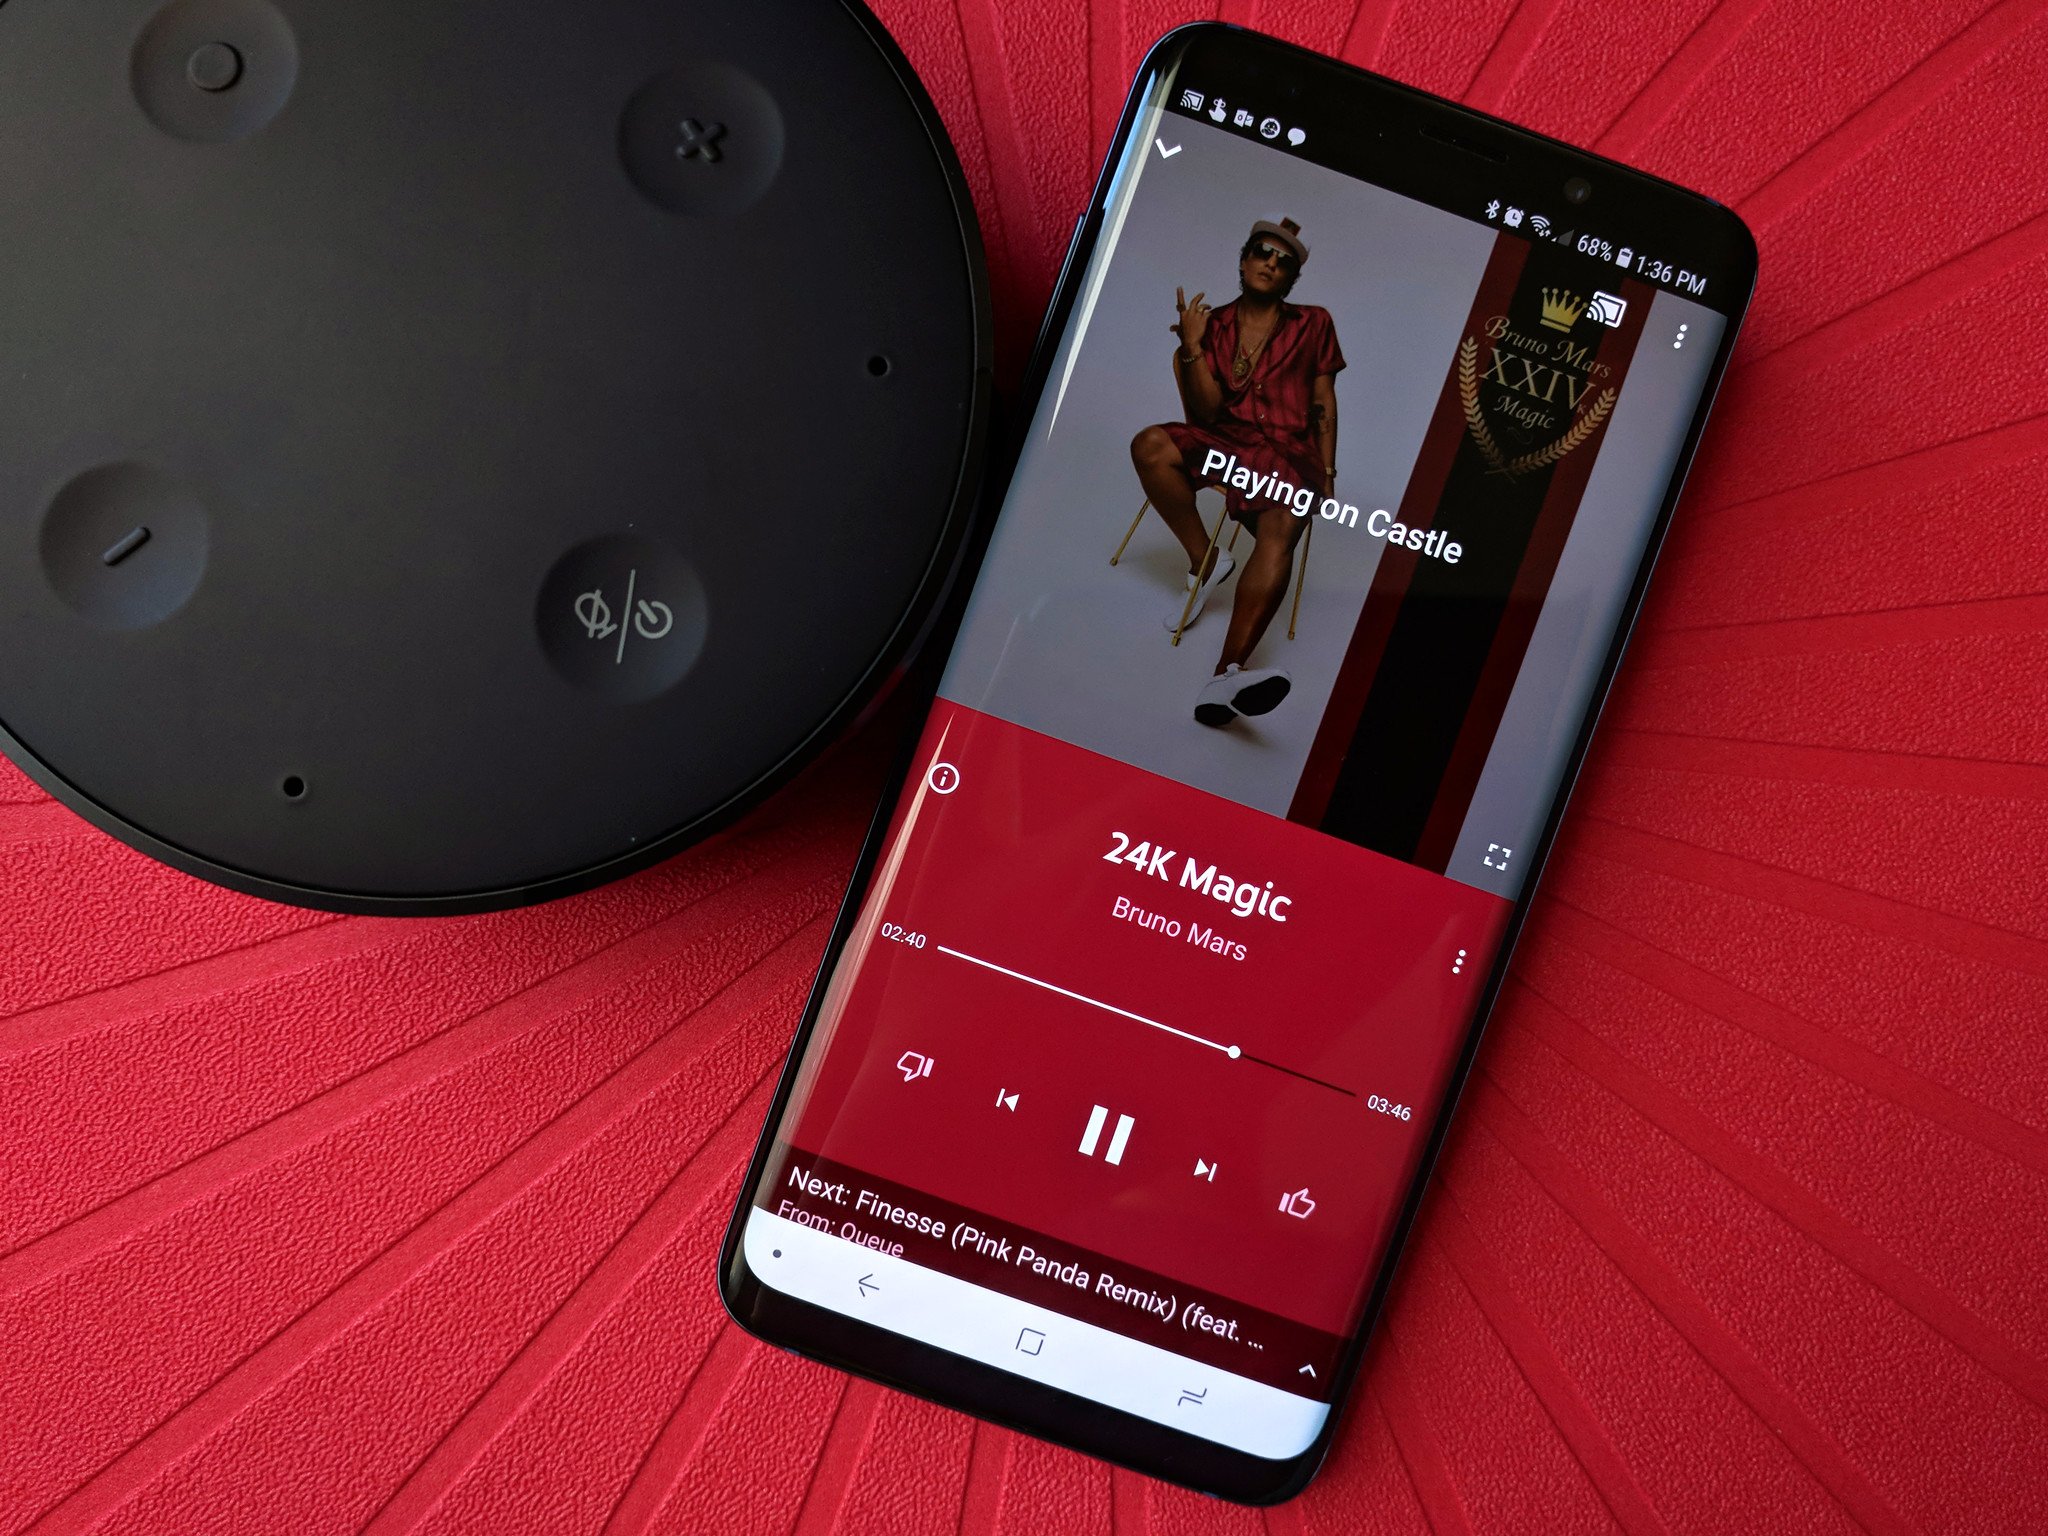 Audio-only and casting to Home are Premium features, but don't pay YouTube Music Premium for them